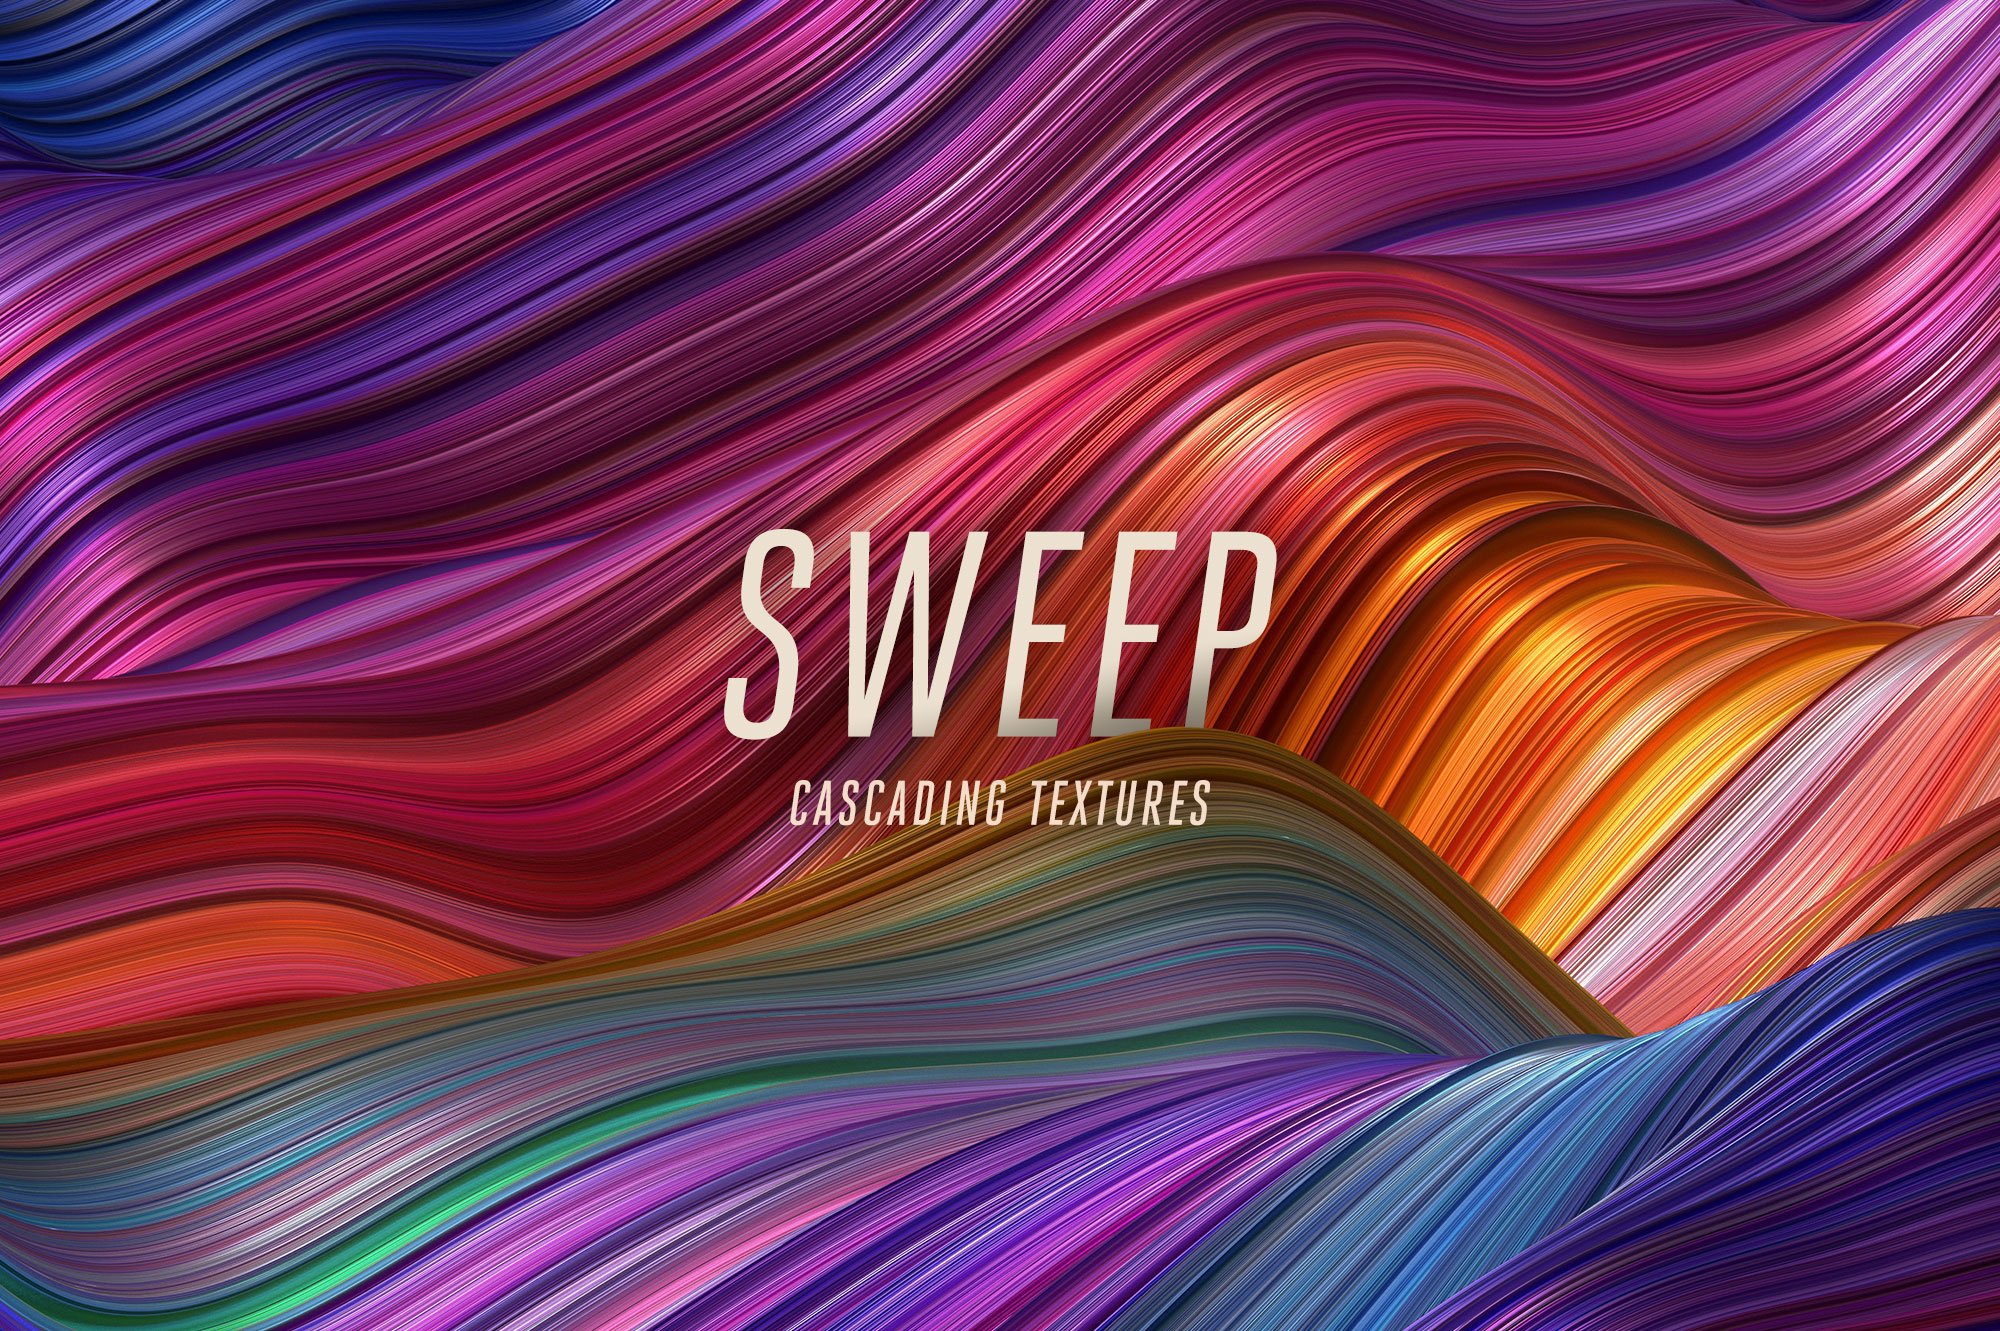 Sweep: Glossy Cascading Textures cover image.